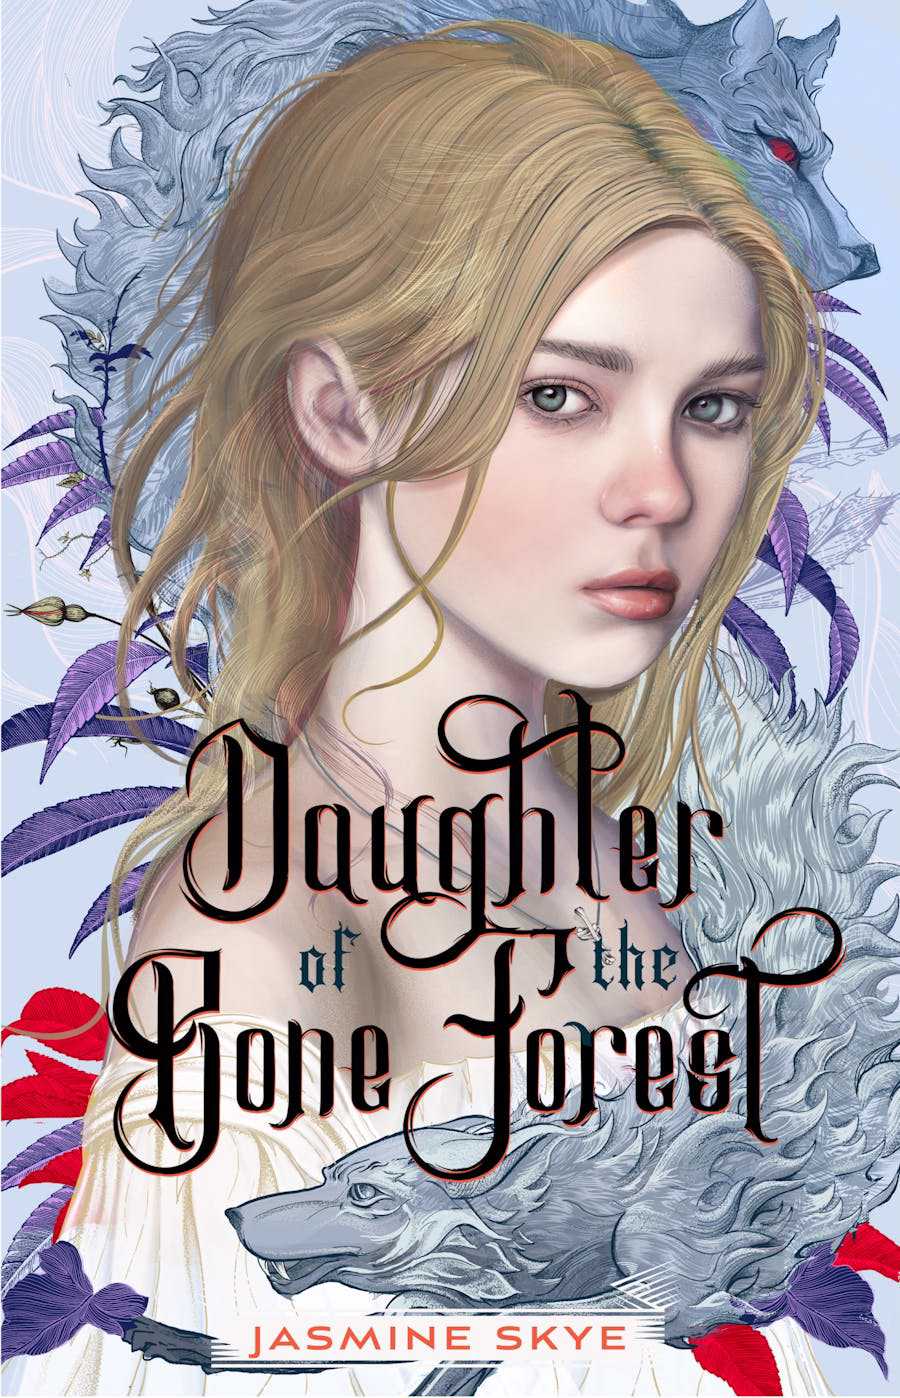 Cover of "Daughter of the Bone Forest" by Jasmine Skye.  A pale blonde girl looks out at the viewer from a soft blue background, with two stylized wolves framing the top and bottom.